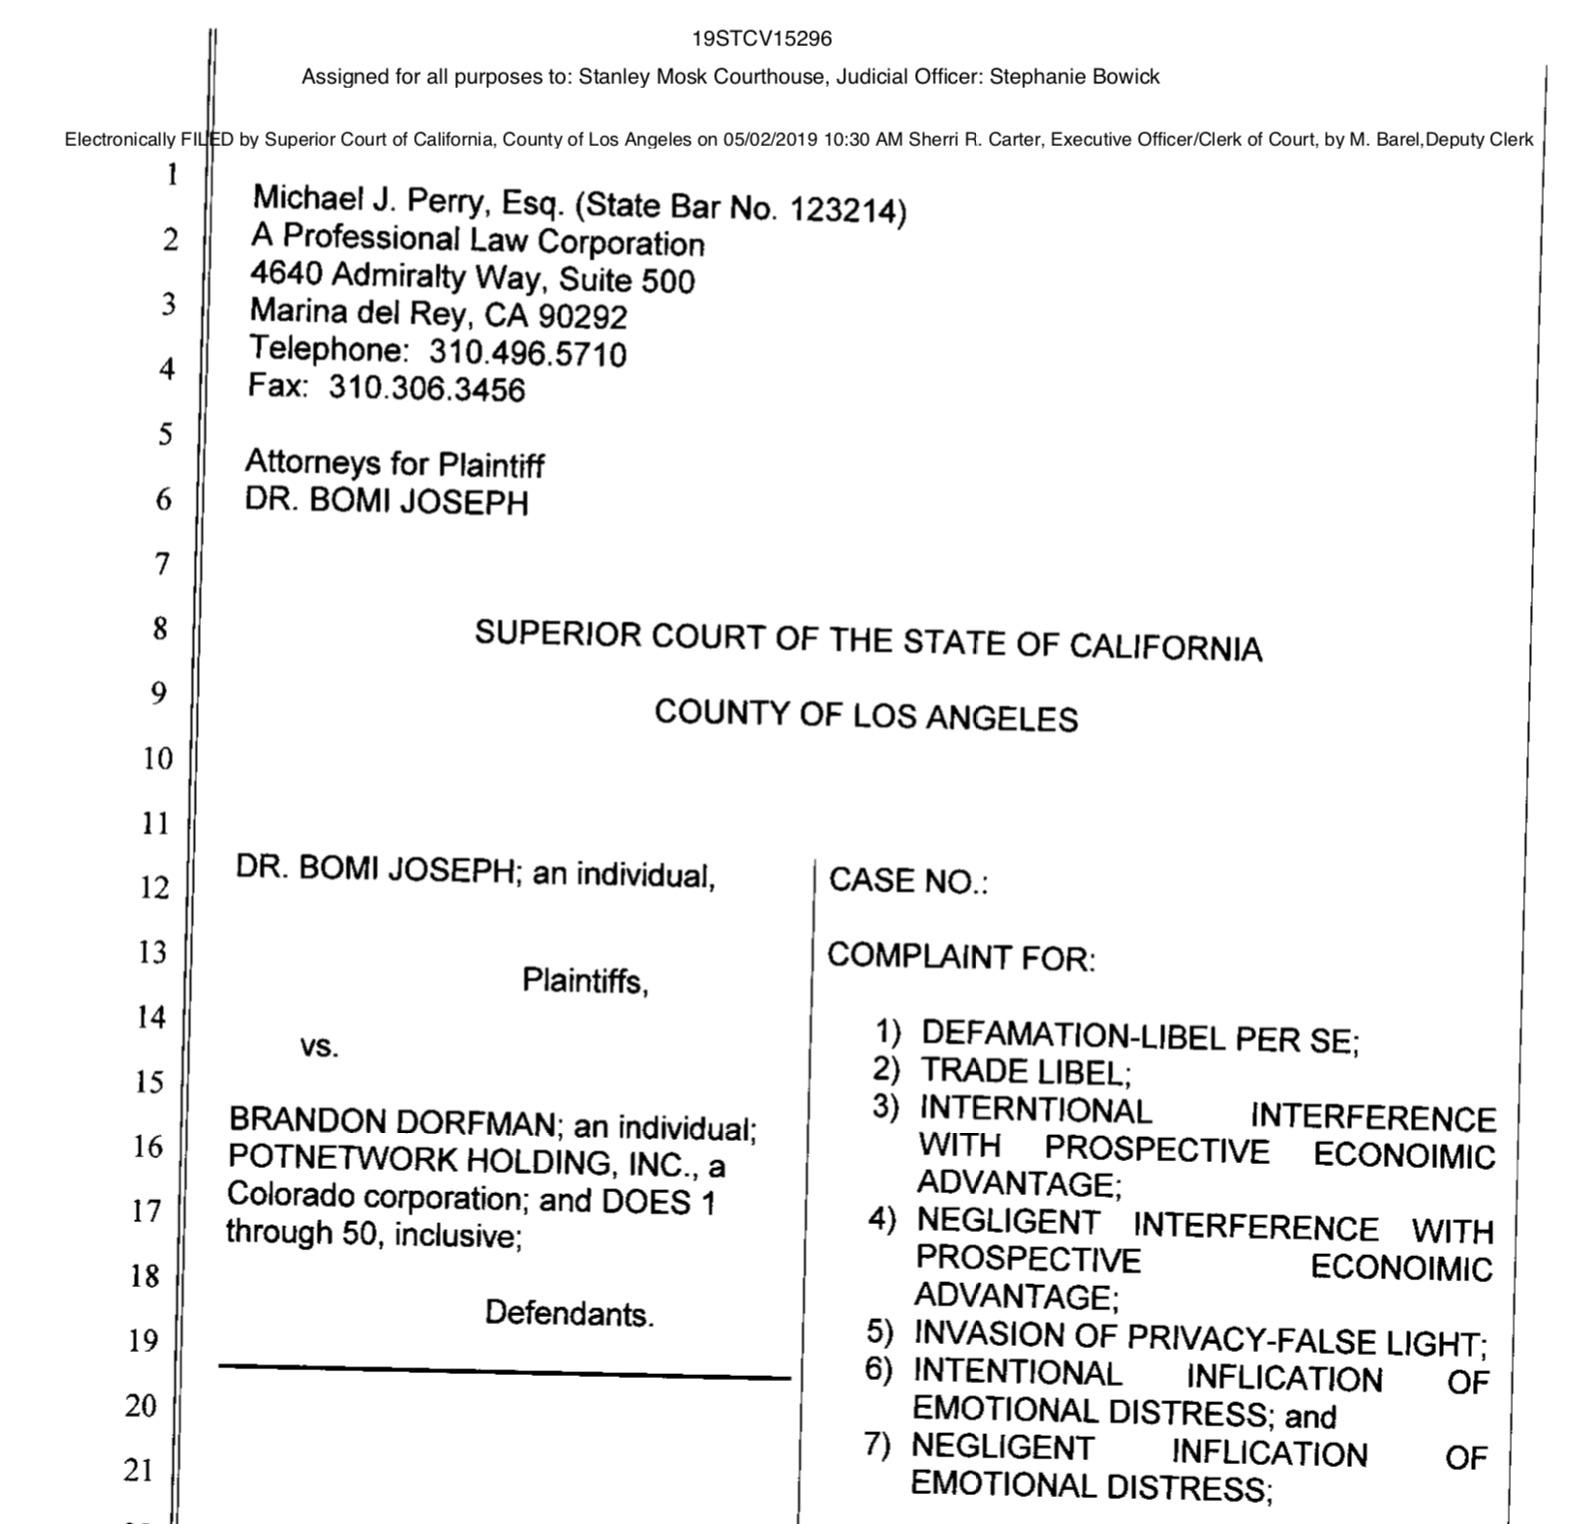 US$30 Million Lawsuit filed in Los Angeles against Brandon Dorfman and Potnetwork Holding, Inc. on May 2 2019.